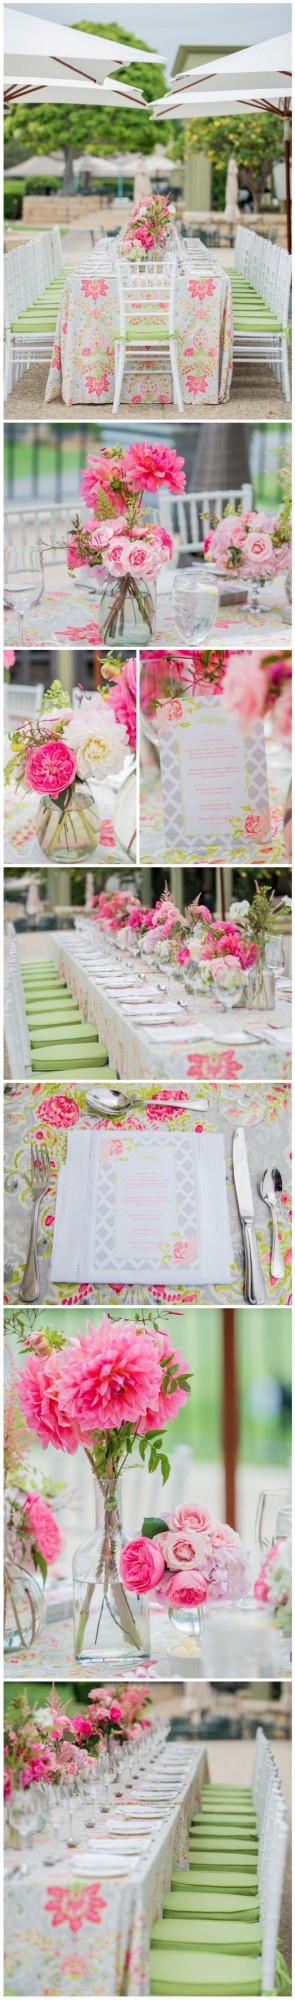 How to Organize The Best Bridal Shower At Home 22 Ideas That Your Guests Will Love (1)